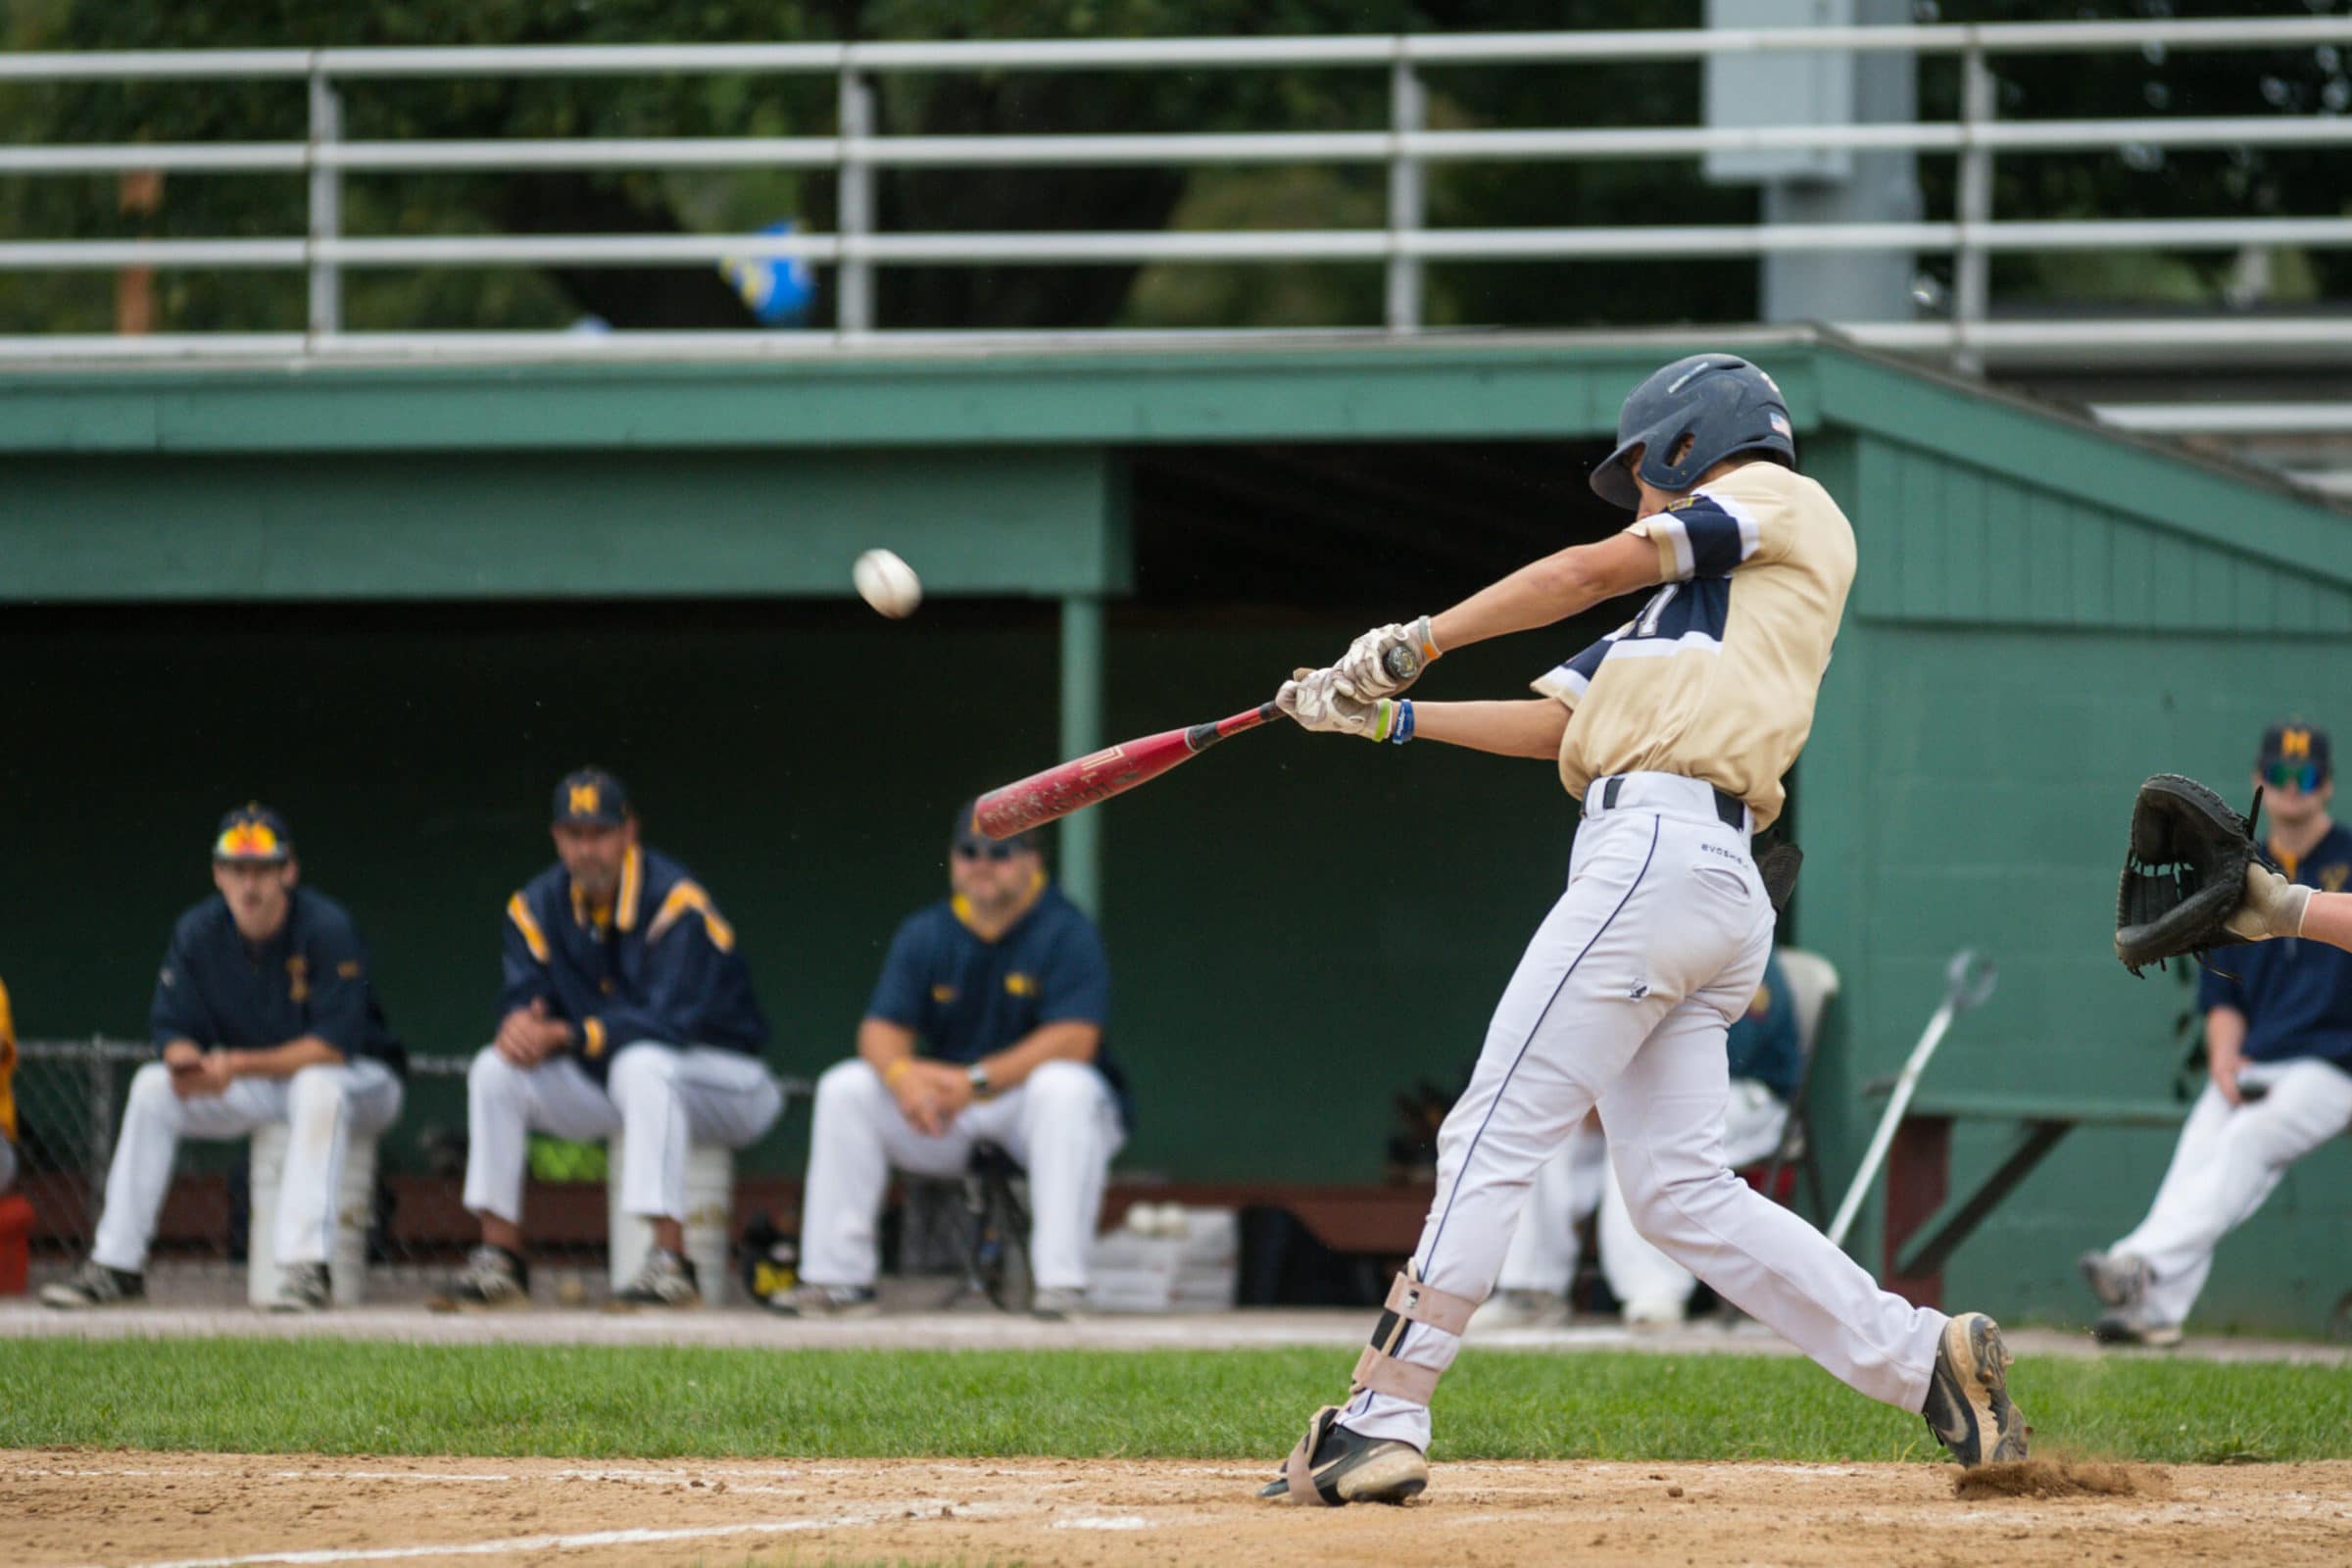 A Shrewsbury batter swings and connects on a pitch during what was a lopsided game in favor of Milford Post 59. (Photo/Jesse Kucewicz)